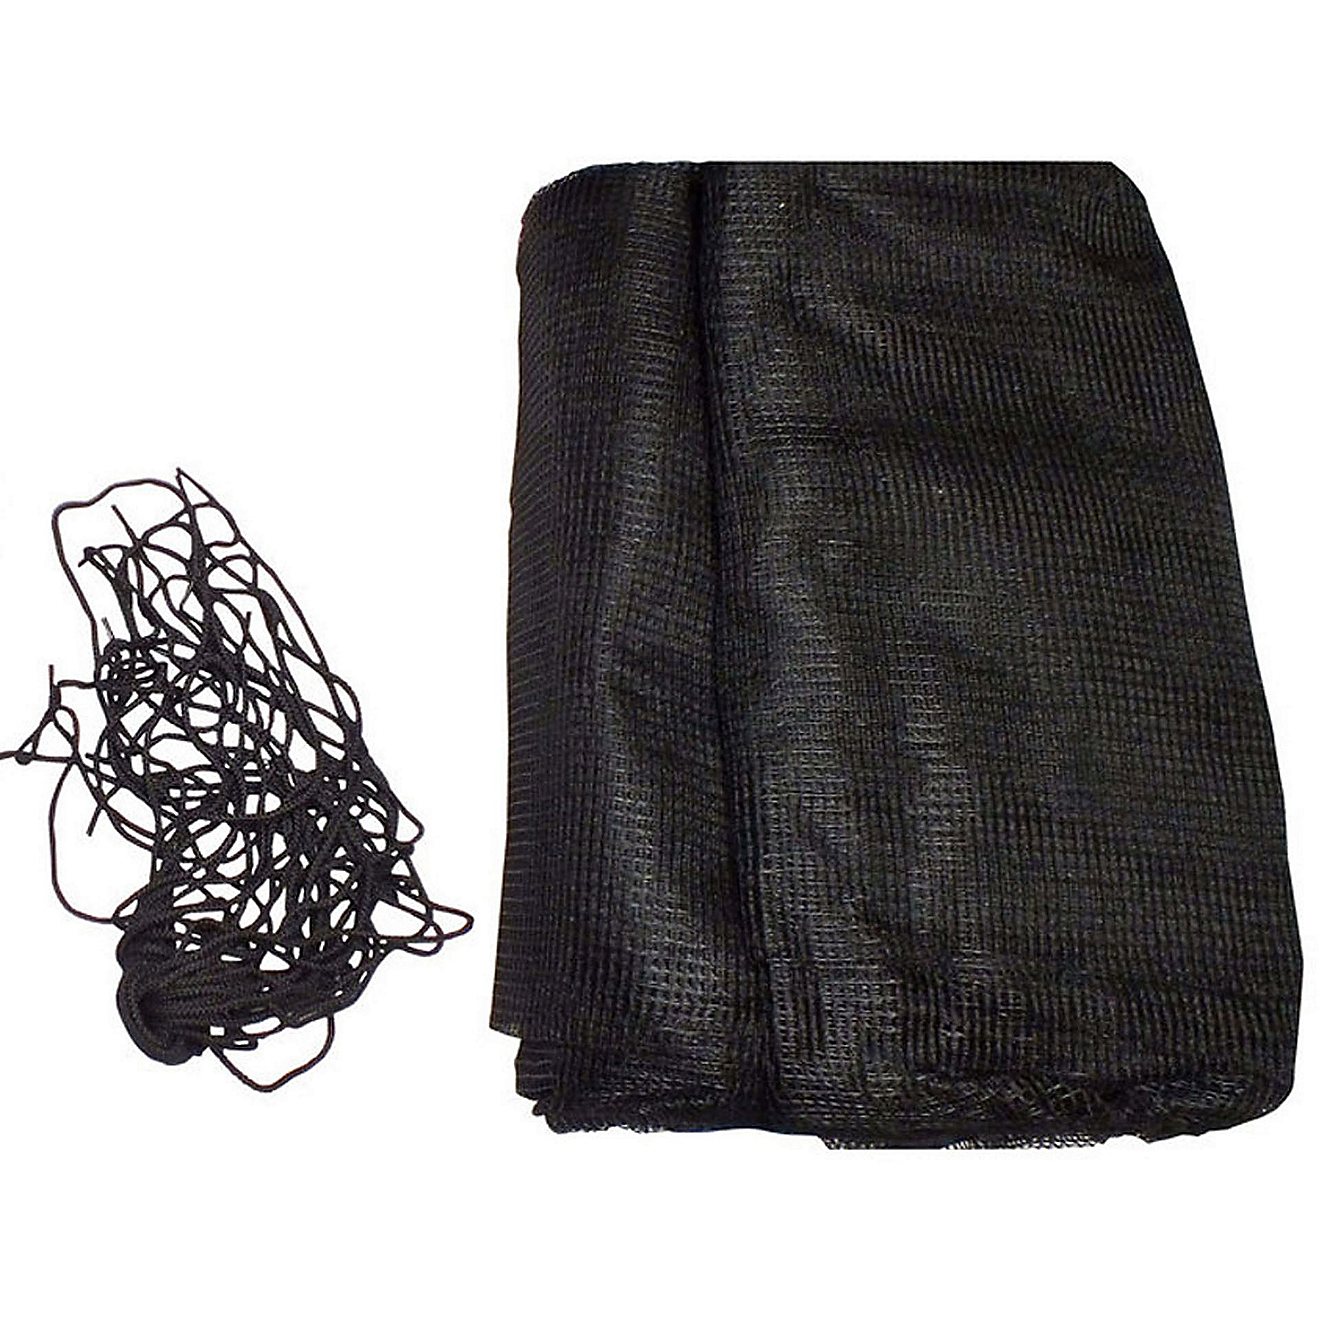 SkyBound 13 ft x 13 ft Square Trampoline Net                                                                                     - view number 1